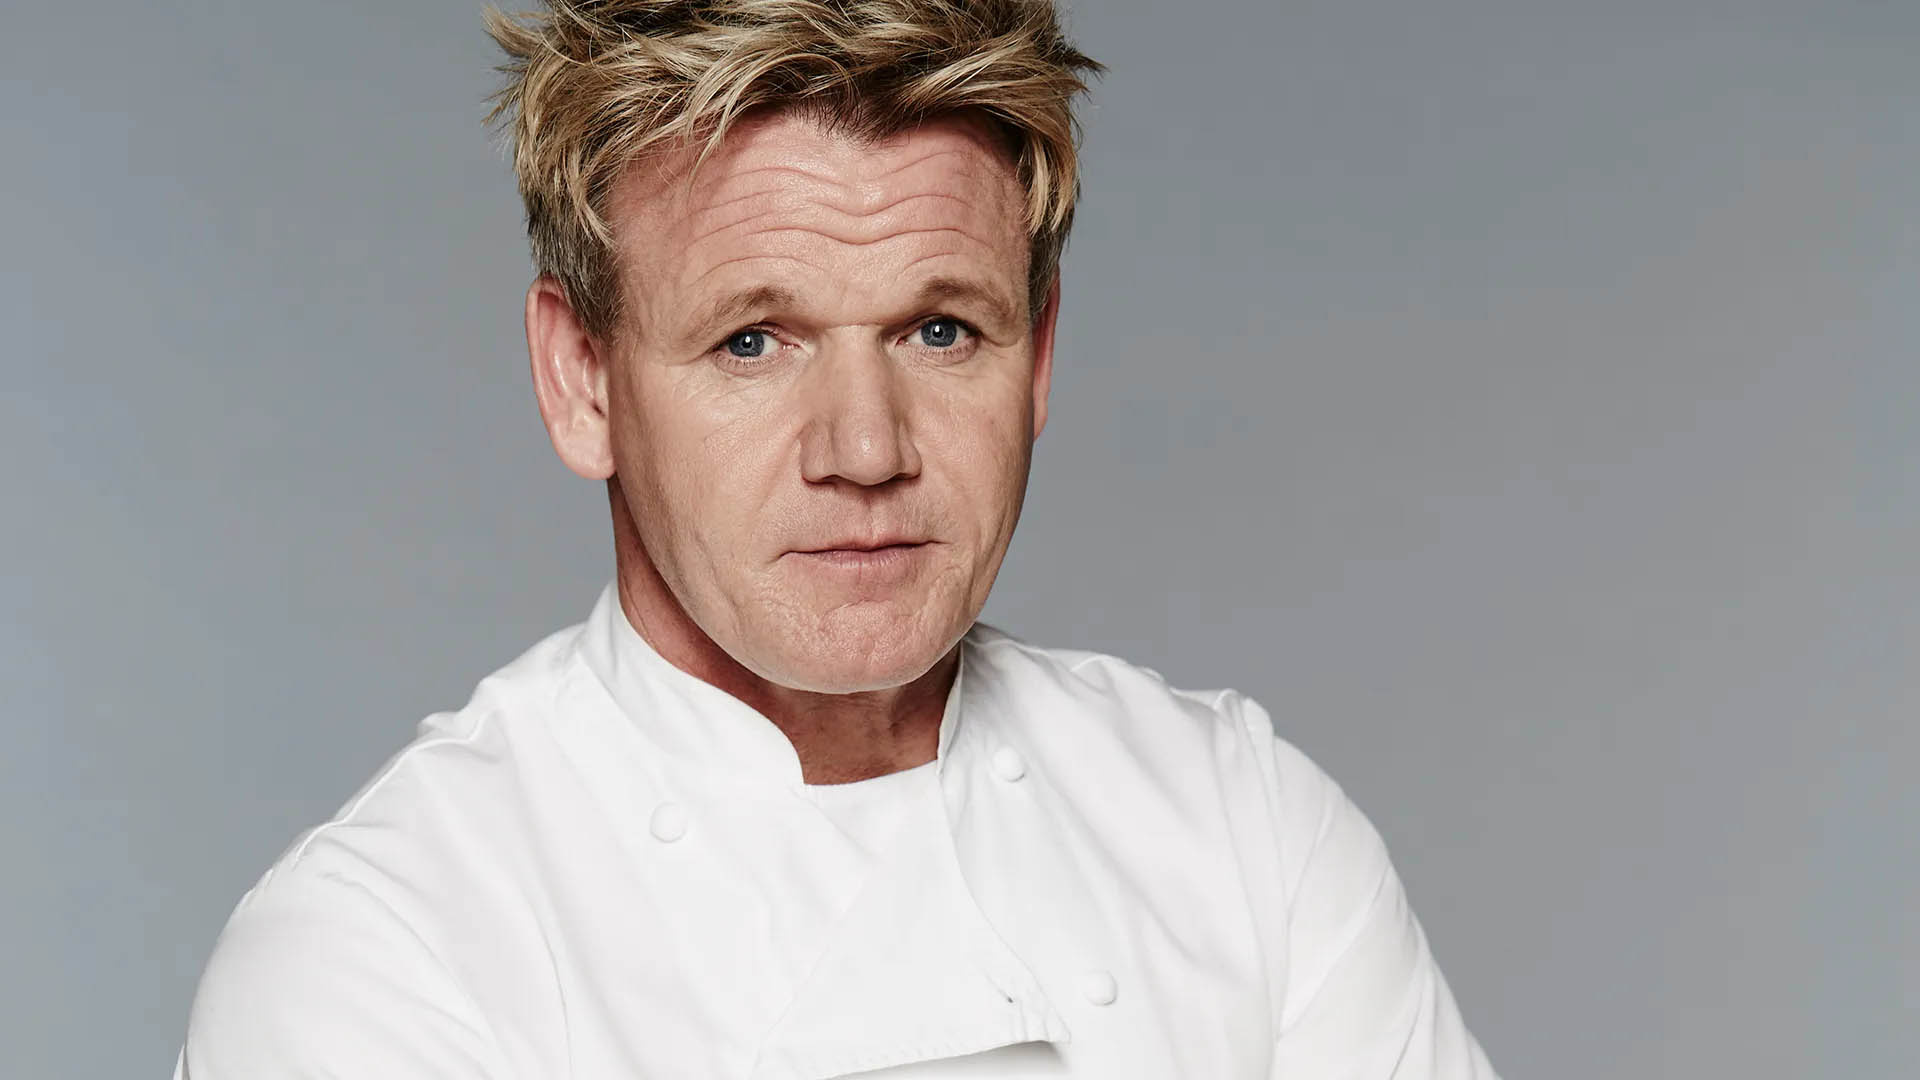 Gordon Ramsay: The third person to have won three Catey Awards, A British chef. 1920x1080 Full HD Background.